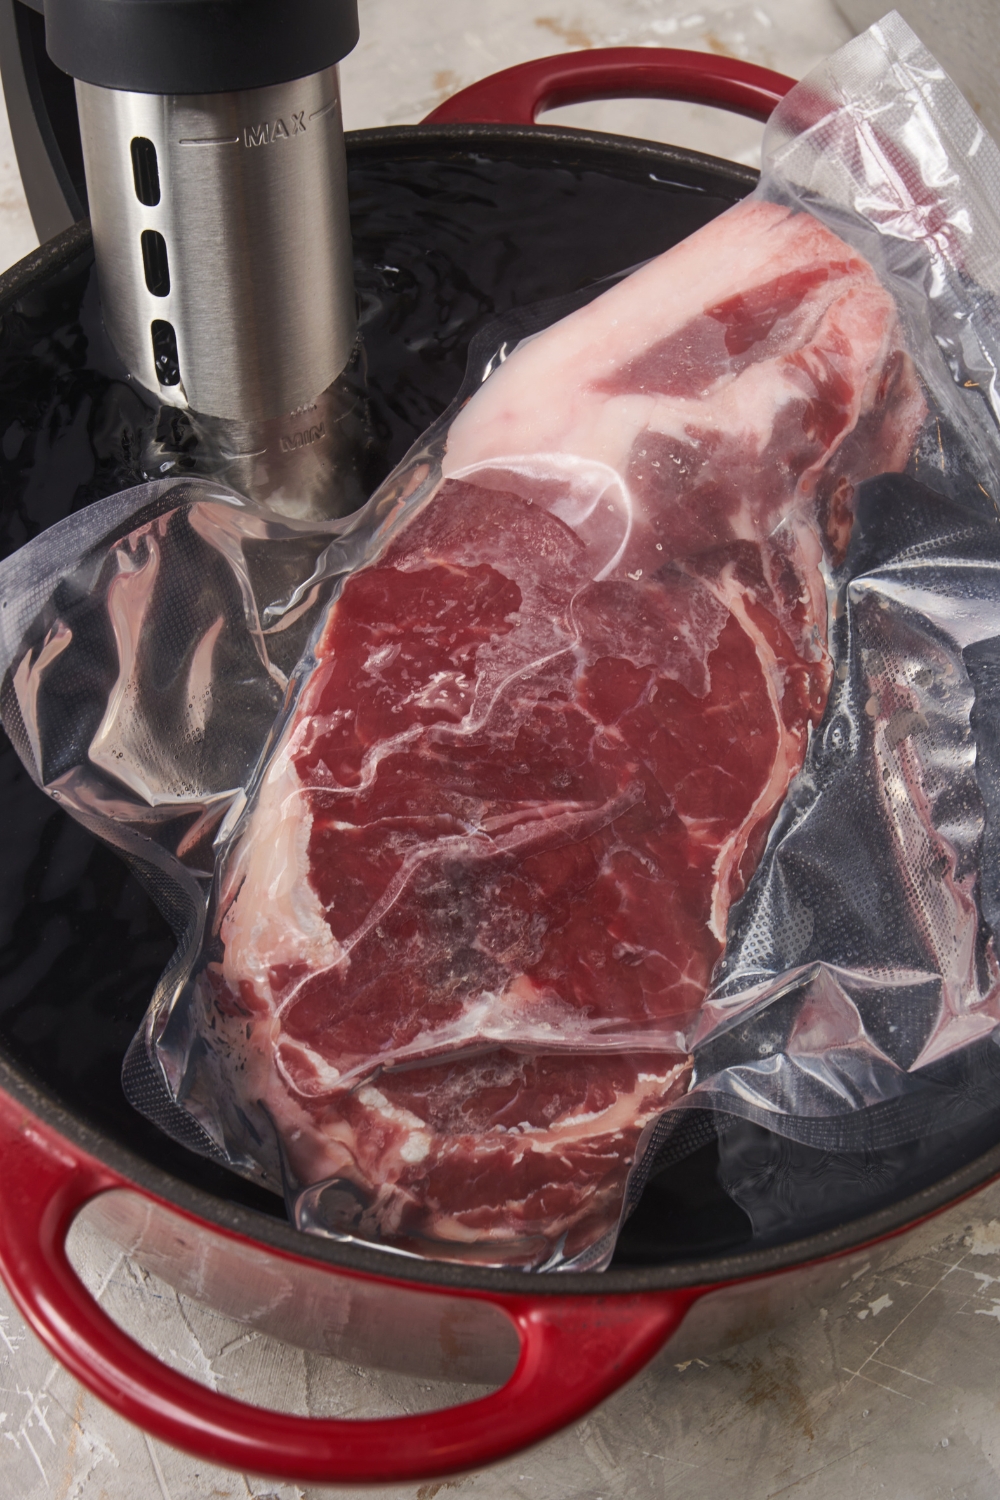 Prime rib in a vacuum sealed bag being cooked in a water bath with a sous vide cooker.